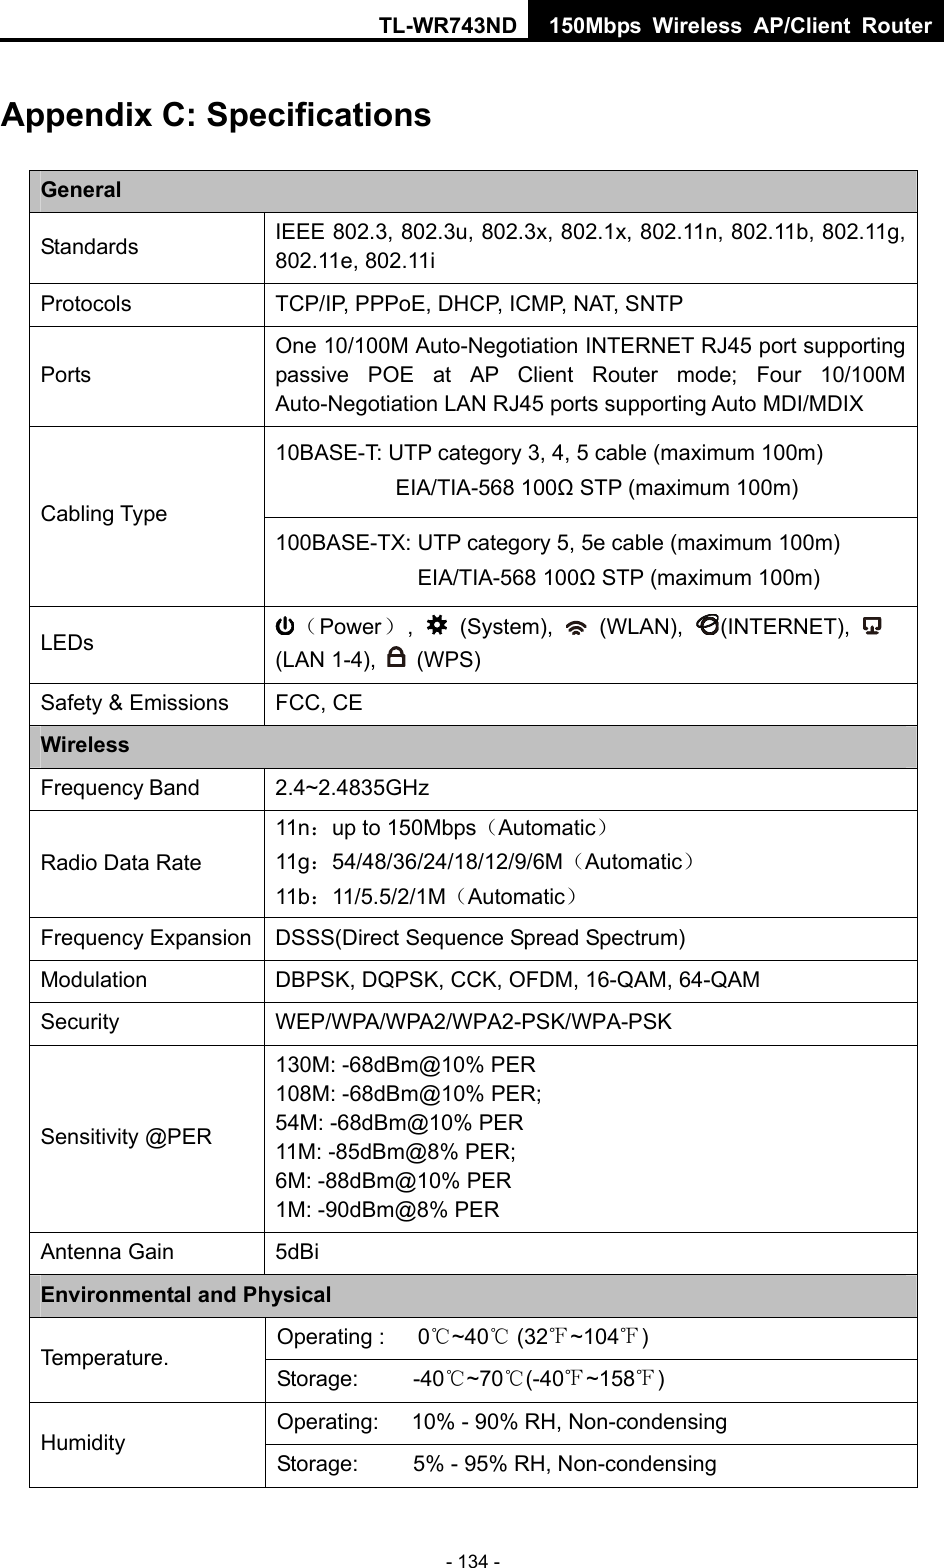 TL-WR743ND 150Mbps Wireless AP/Client Router - 134 - Appendix C: Specifications General Standards  IEEE 802.3, 802.3u, 802.3x, 802.1x, 802.11n, 802.11b, 802.11g, 802.11e, 802.11i    Protocols  TCP/IP, PPPoE, DHCP, ICMP, NAT, SNTP Ports One 10/100M Auto-Negotiation INTERNET RJ45 port supporting passive POE at AP Client Router mode; Four 10/100M Auto-Negotiation LAN RJ45 ports supporting Auto MDI/MDIX 10BASE-T: UTP category 3, 4, 5 cable (maximum 100m) EIA/TIA-568 100Ω STP (maximum 100m) Cabling Type 100BASE-TX: UTP category 5, 5e cable (maximum 100m) EIA/TIA-568 100Ω STP (maximum 100m) LEDs  （Power）,   (System),   (WLAN),  (INTERNET),   (LAN 1-4),   (WPS) Safety &amp; Emissions  FCC, CE Wireless Frequency Band 2.4~2.4835GHz Radio Data Rate 11n：up to 150Mbps（Automatic） 11g：54/48/36/24/18/12/9/6M（Automatic） 11b：11/5.5/2/1M（Automatic） Frequency Expansion  DSSS(Direct Sequence Spread Spectrum) Modulation  DBPSK, DQPSK, CCK, OFDM, 16-QAM, 64-QAM Security WEP/WPA/WPA2/WPA2-PSK/WPA-PSK Sensitivity @PER 130M: -68dBm@10% PER 108M: -68dBm@10% PER;   54M: -68dBm@10% PER 11M: -85dBm@8% PER;   6M: -88dBm@10% PER 1M: -90dBm@8% PER Antenna Gain  5dBi Environmental and Physical Operating :   0~40 (32 ~104) Temperature.  Storage:     -40~70(-40~158) Operating:      10% - 90% RH, Non-condensing Humidity  Storage:          5% - 95% RH, Non-condensing 